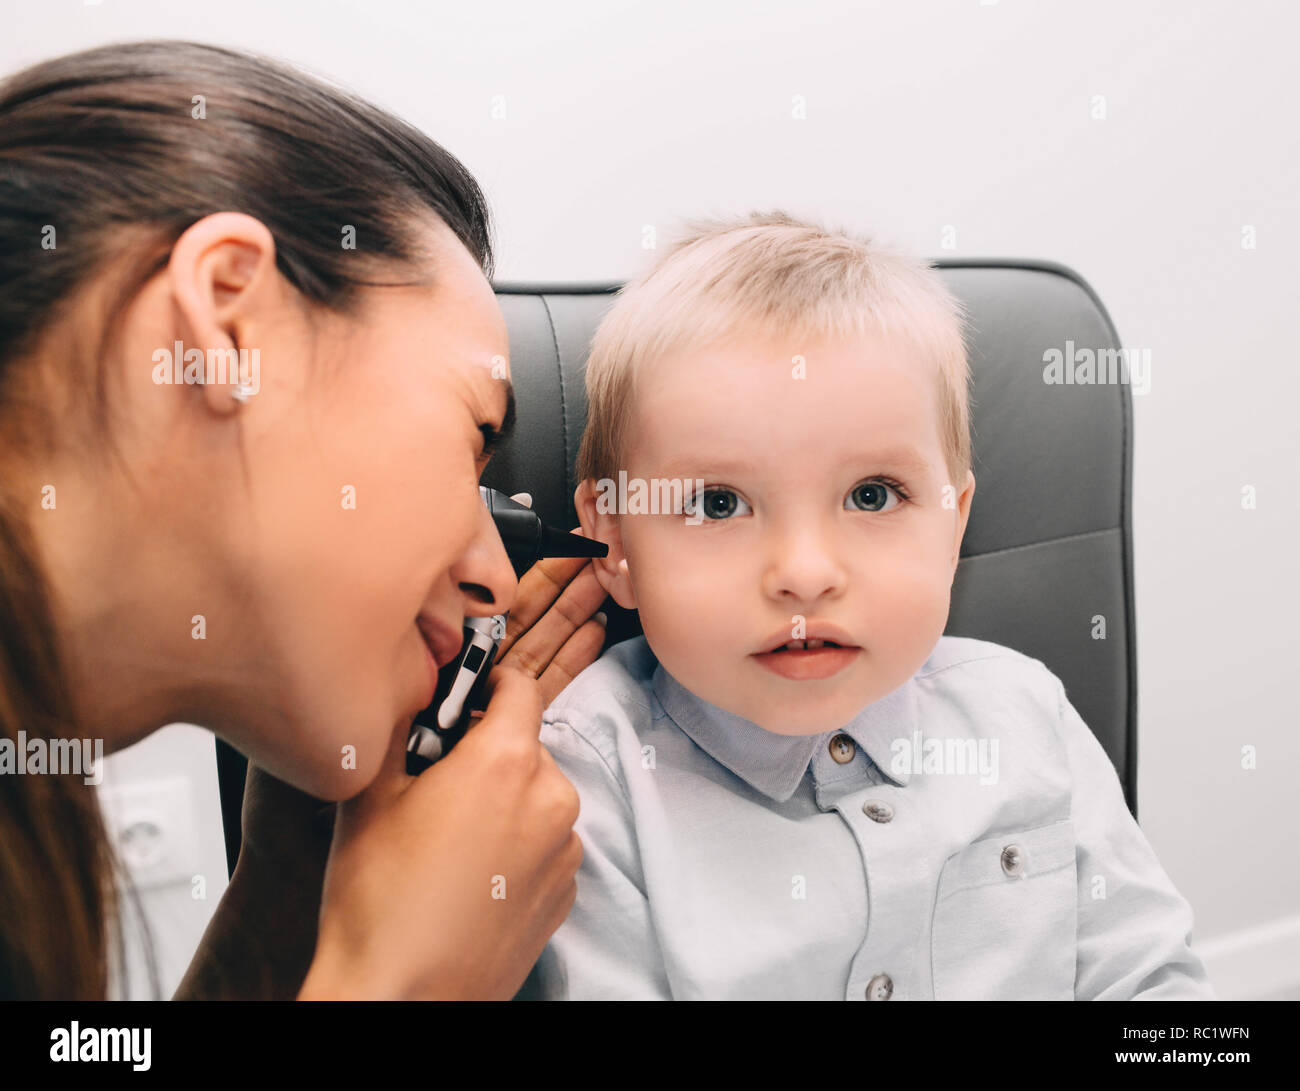 audiologist doctor doing an ear exam with otoscope to little boy Stock Photo